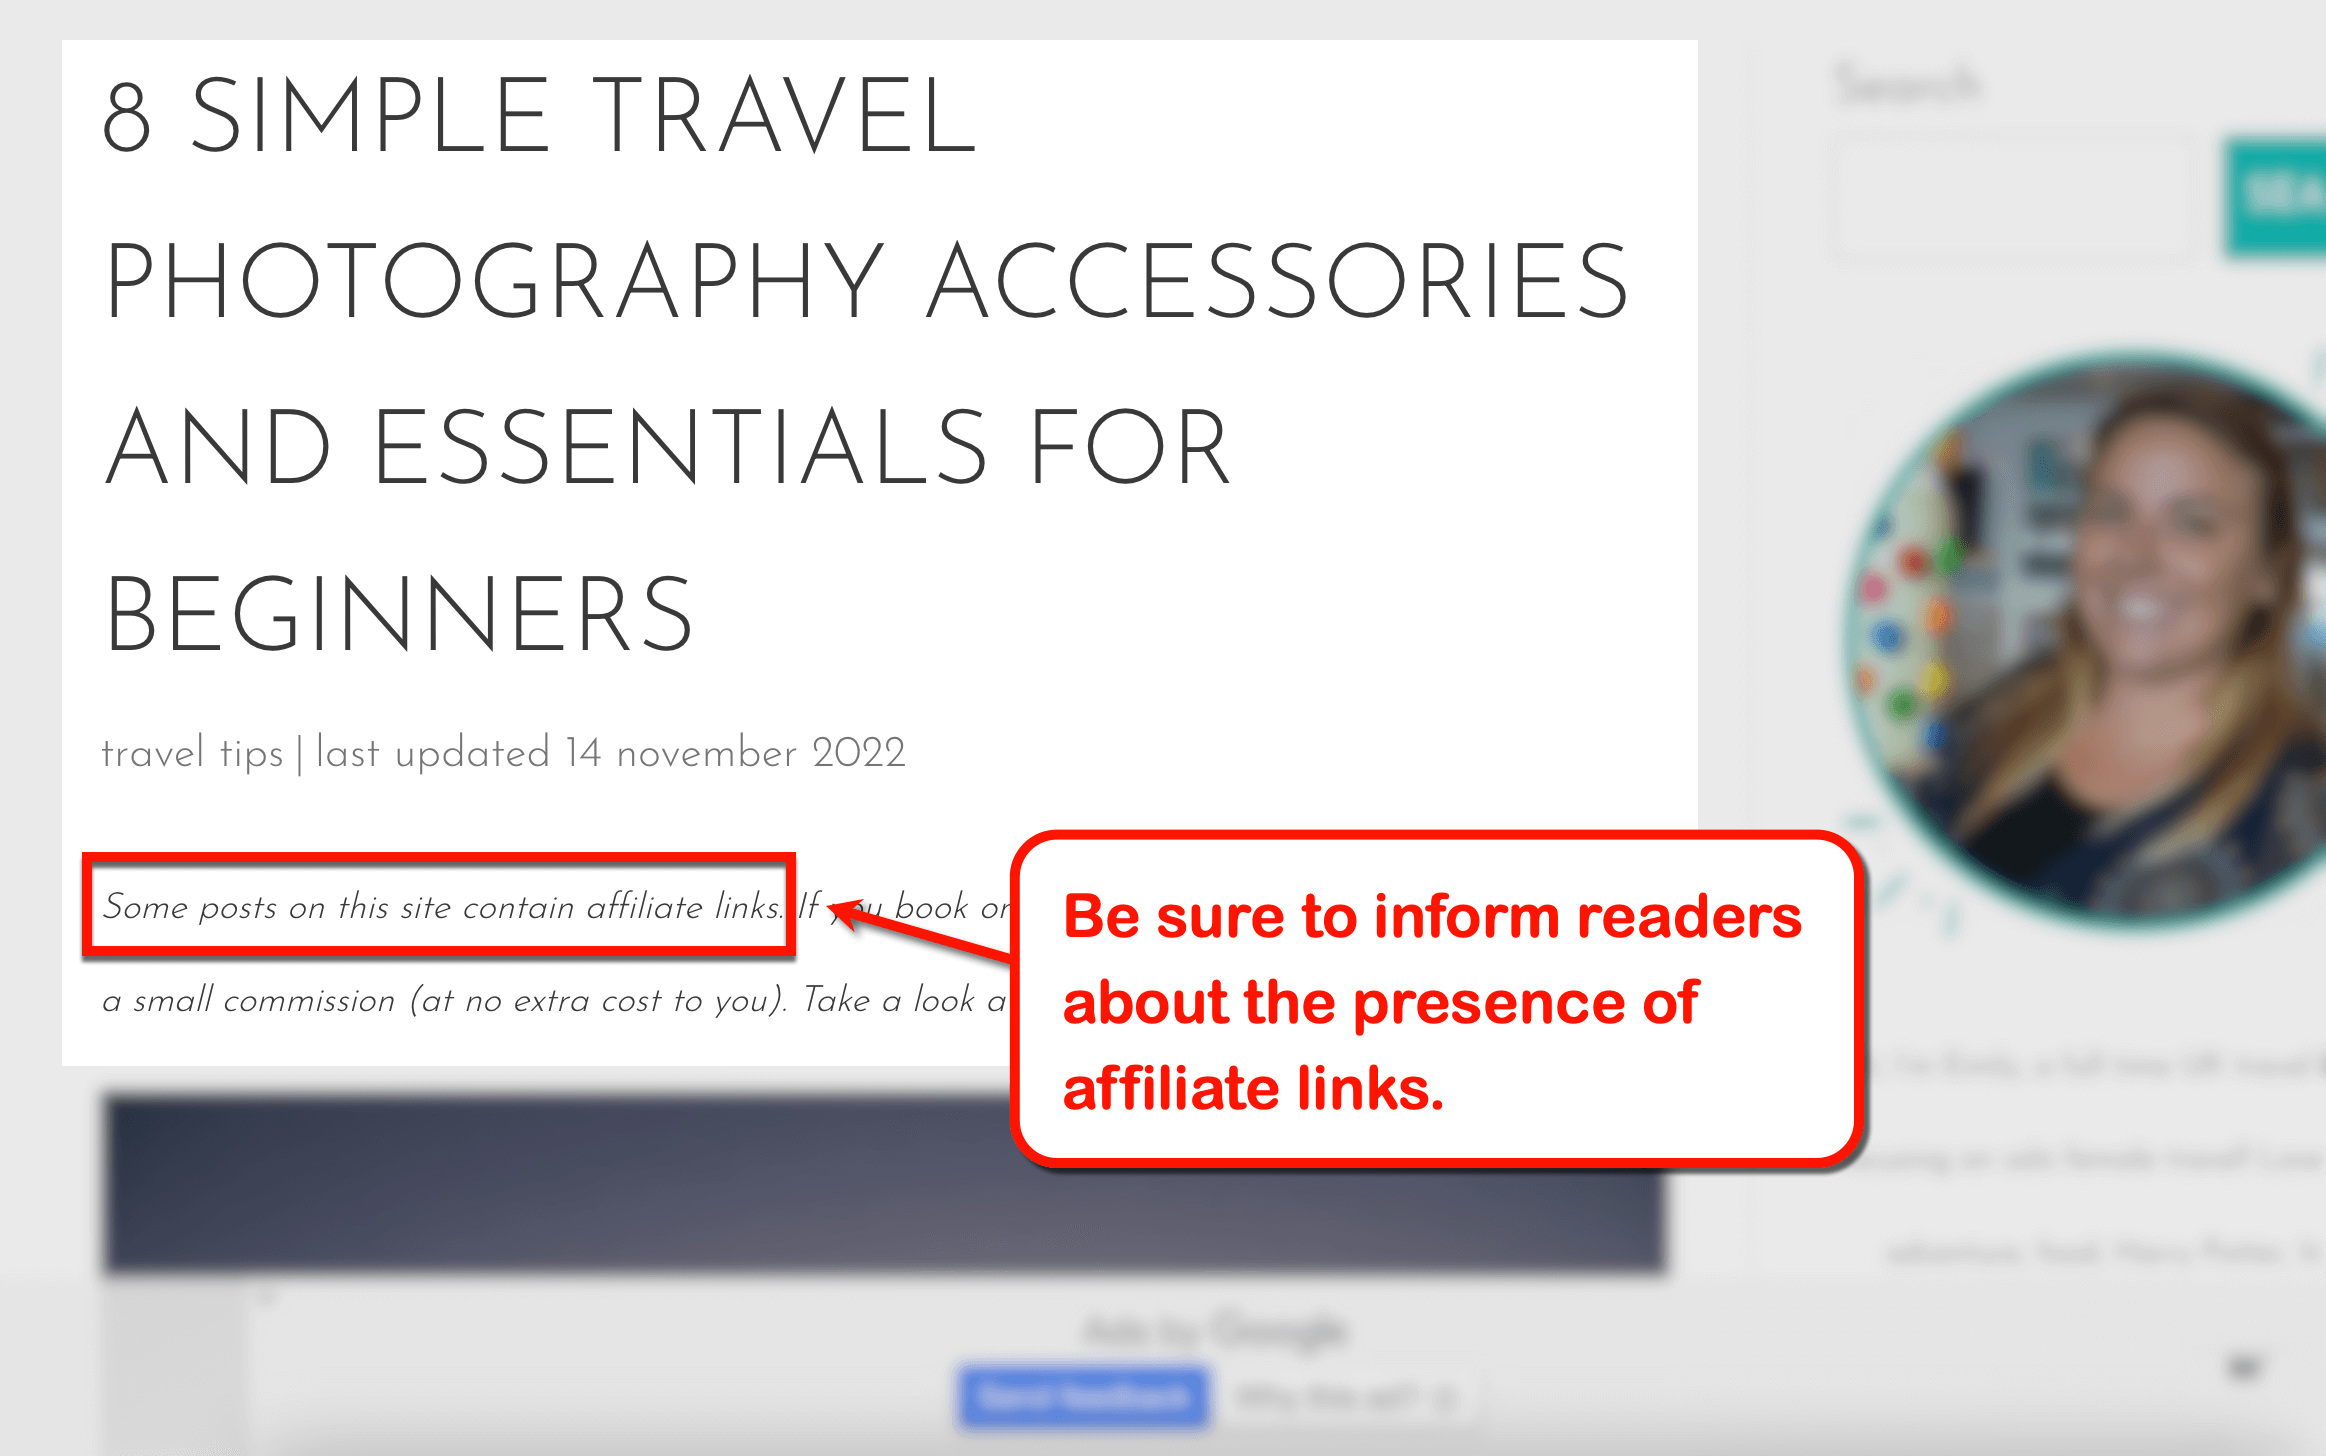 Inform readers about the affiliate links.